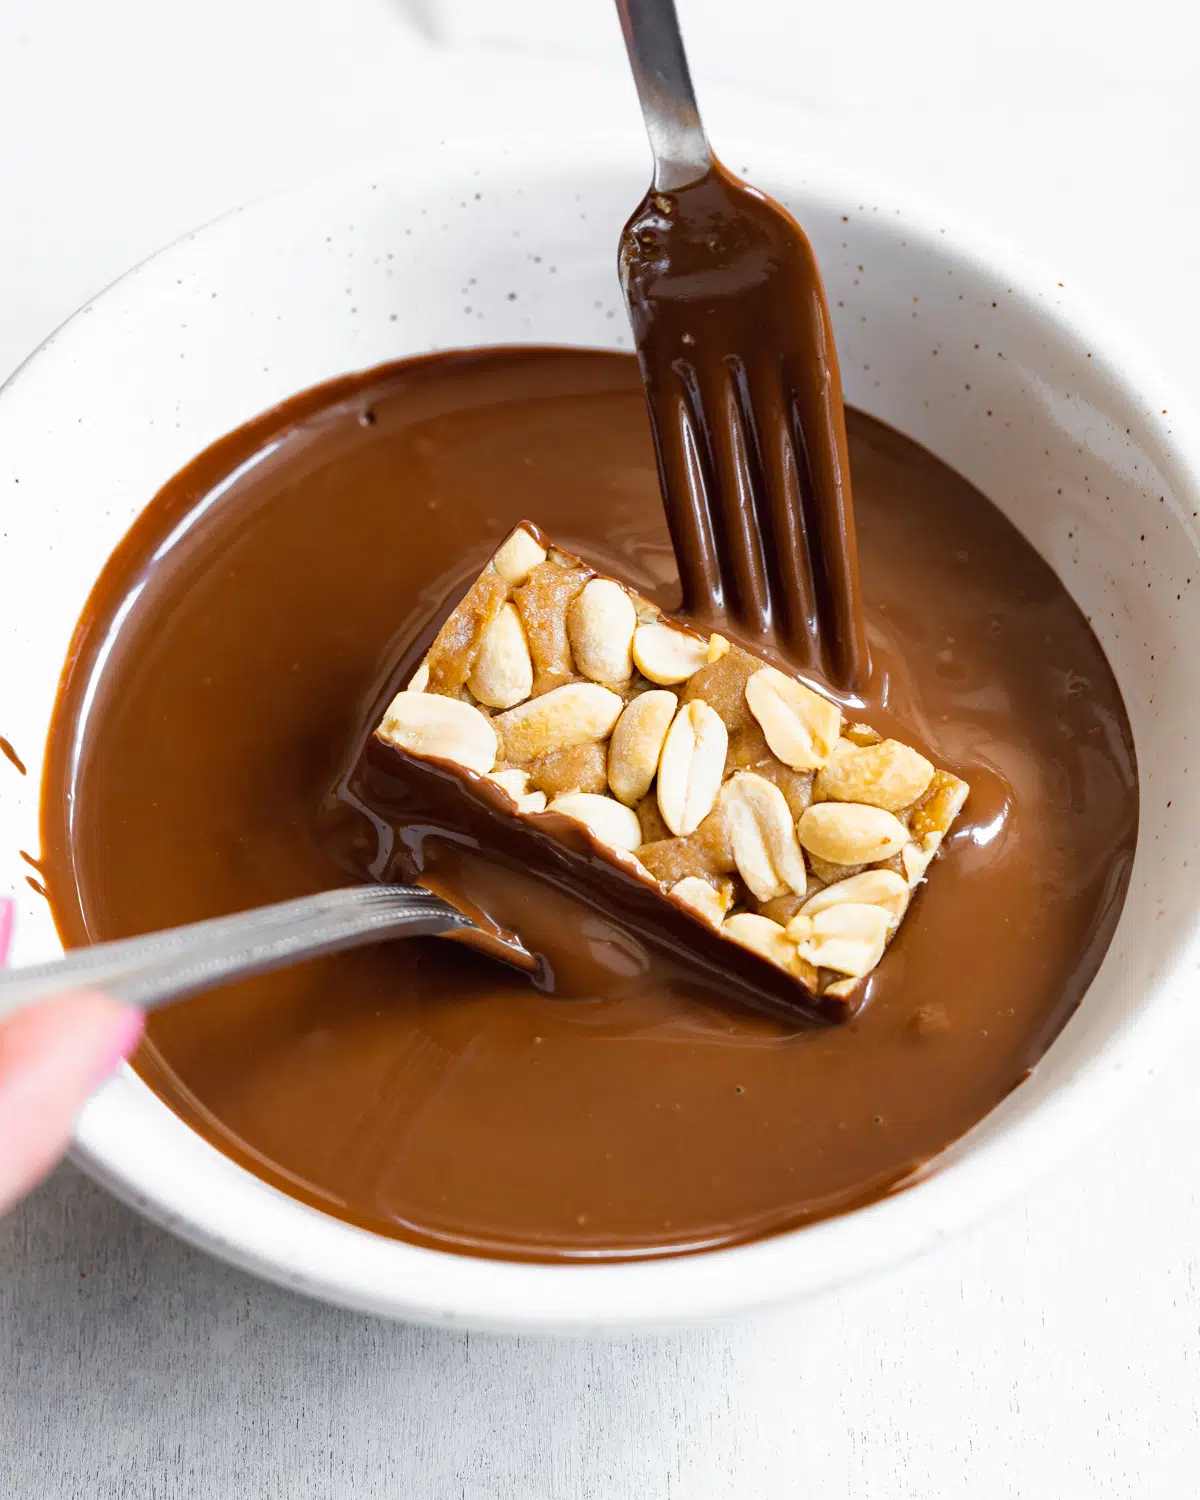 dipping homemade snickers bars in chocolate.